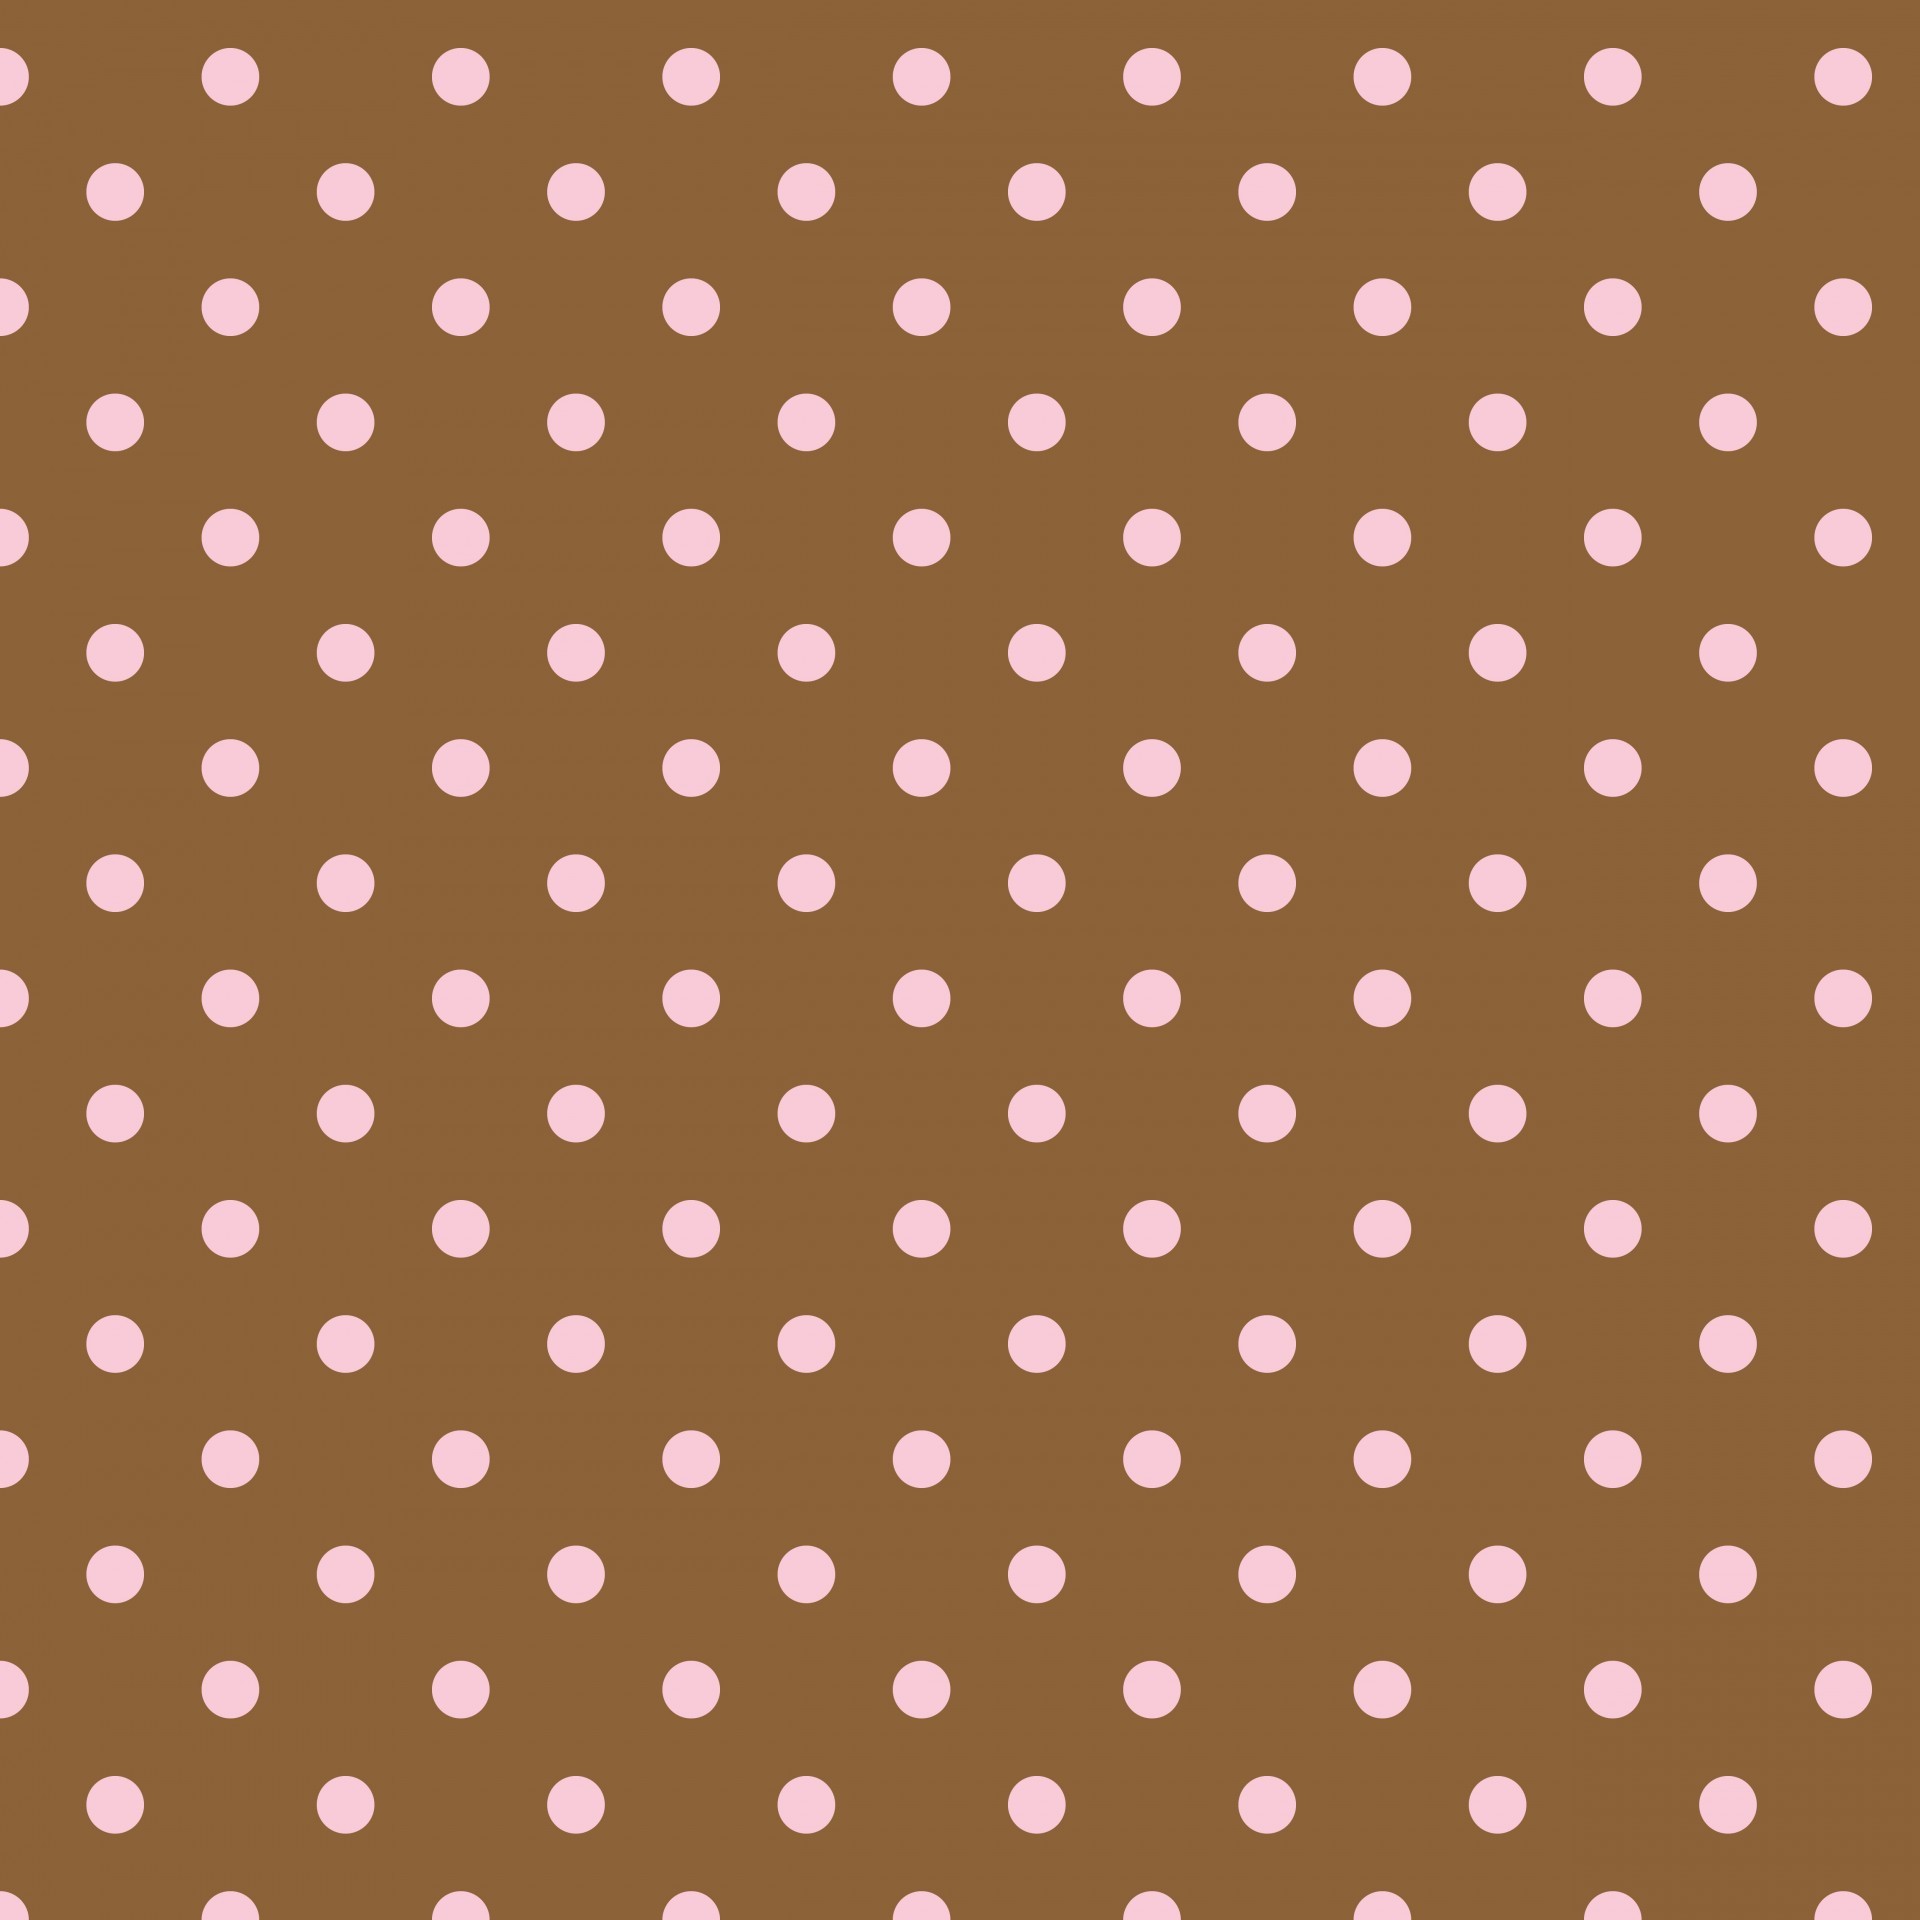 1920x1920 Polka dots in brown and pink wallpaper background